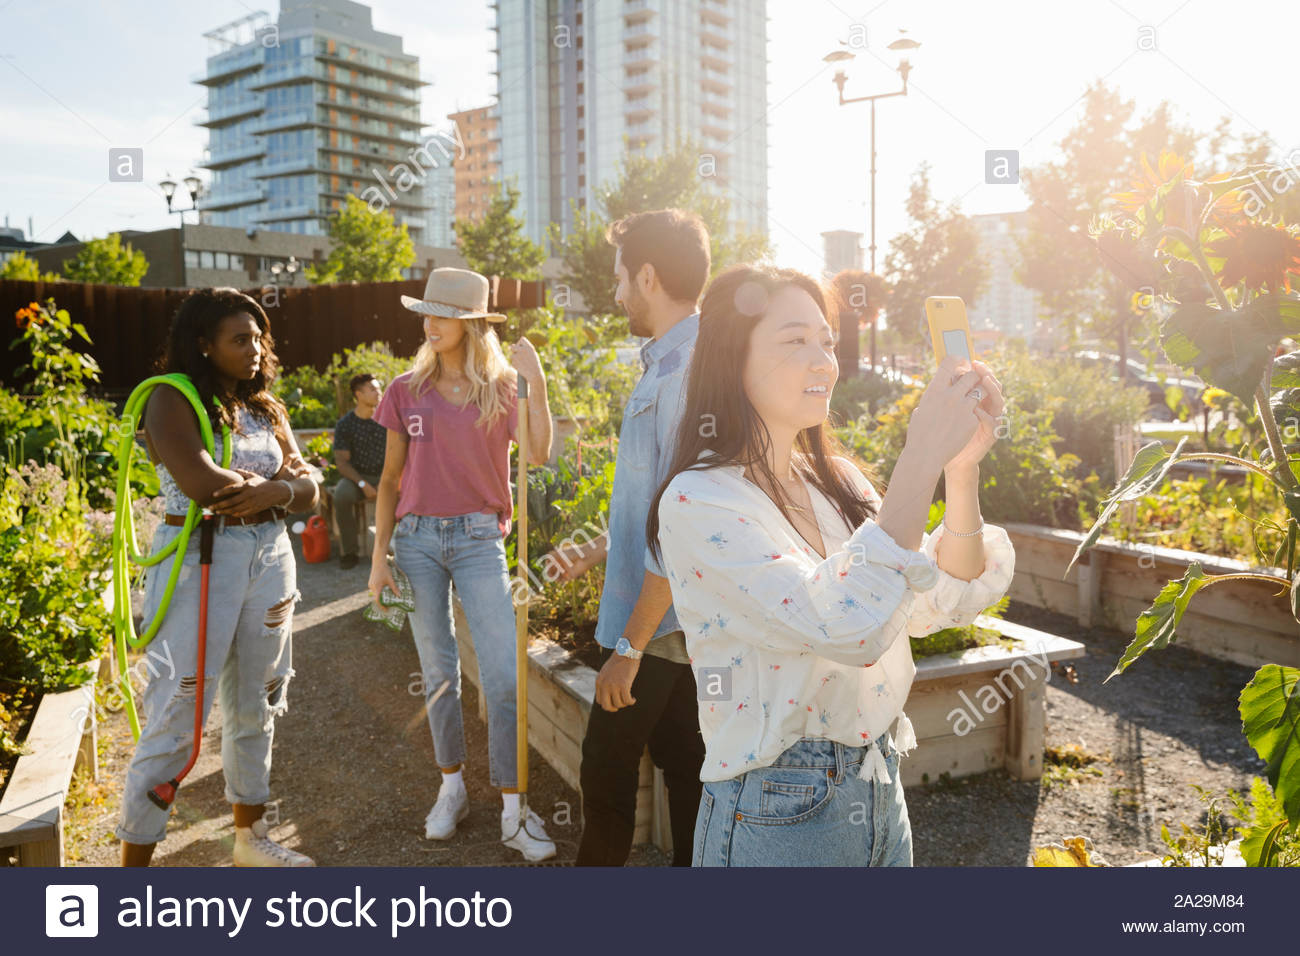 Young woman with camera phone in sunny, urban community garden Stock Photo